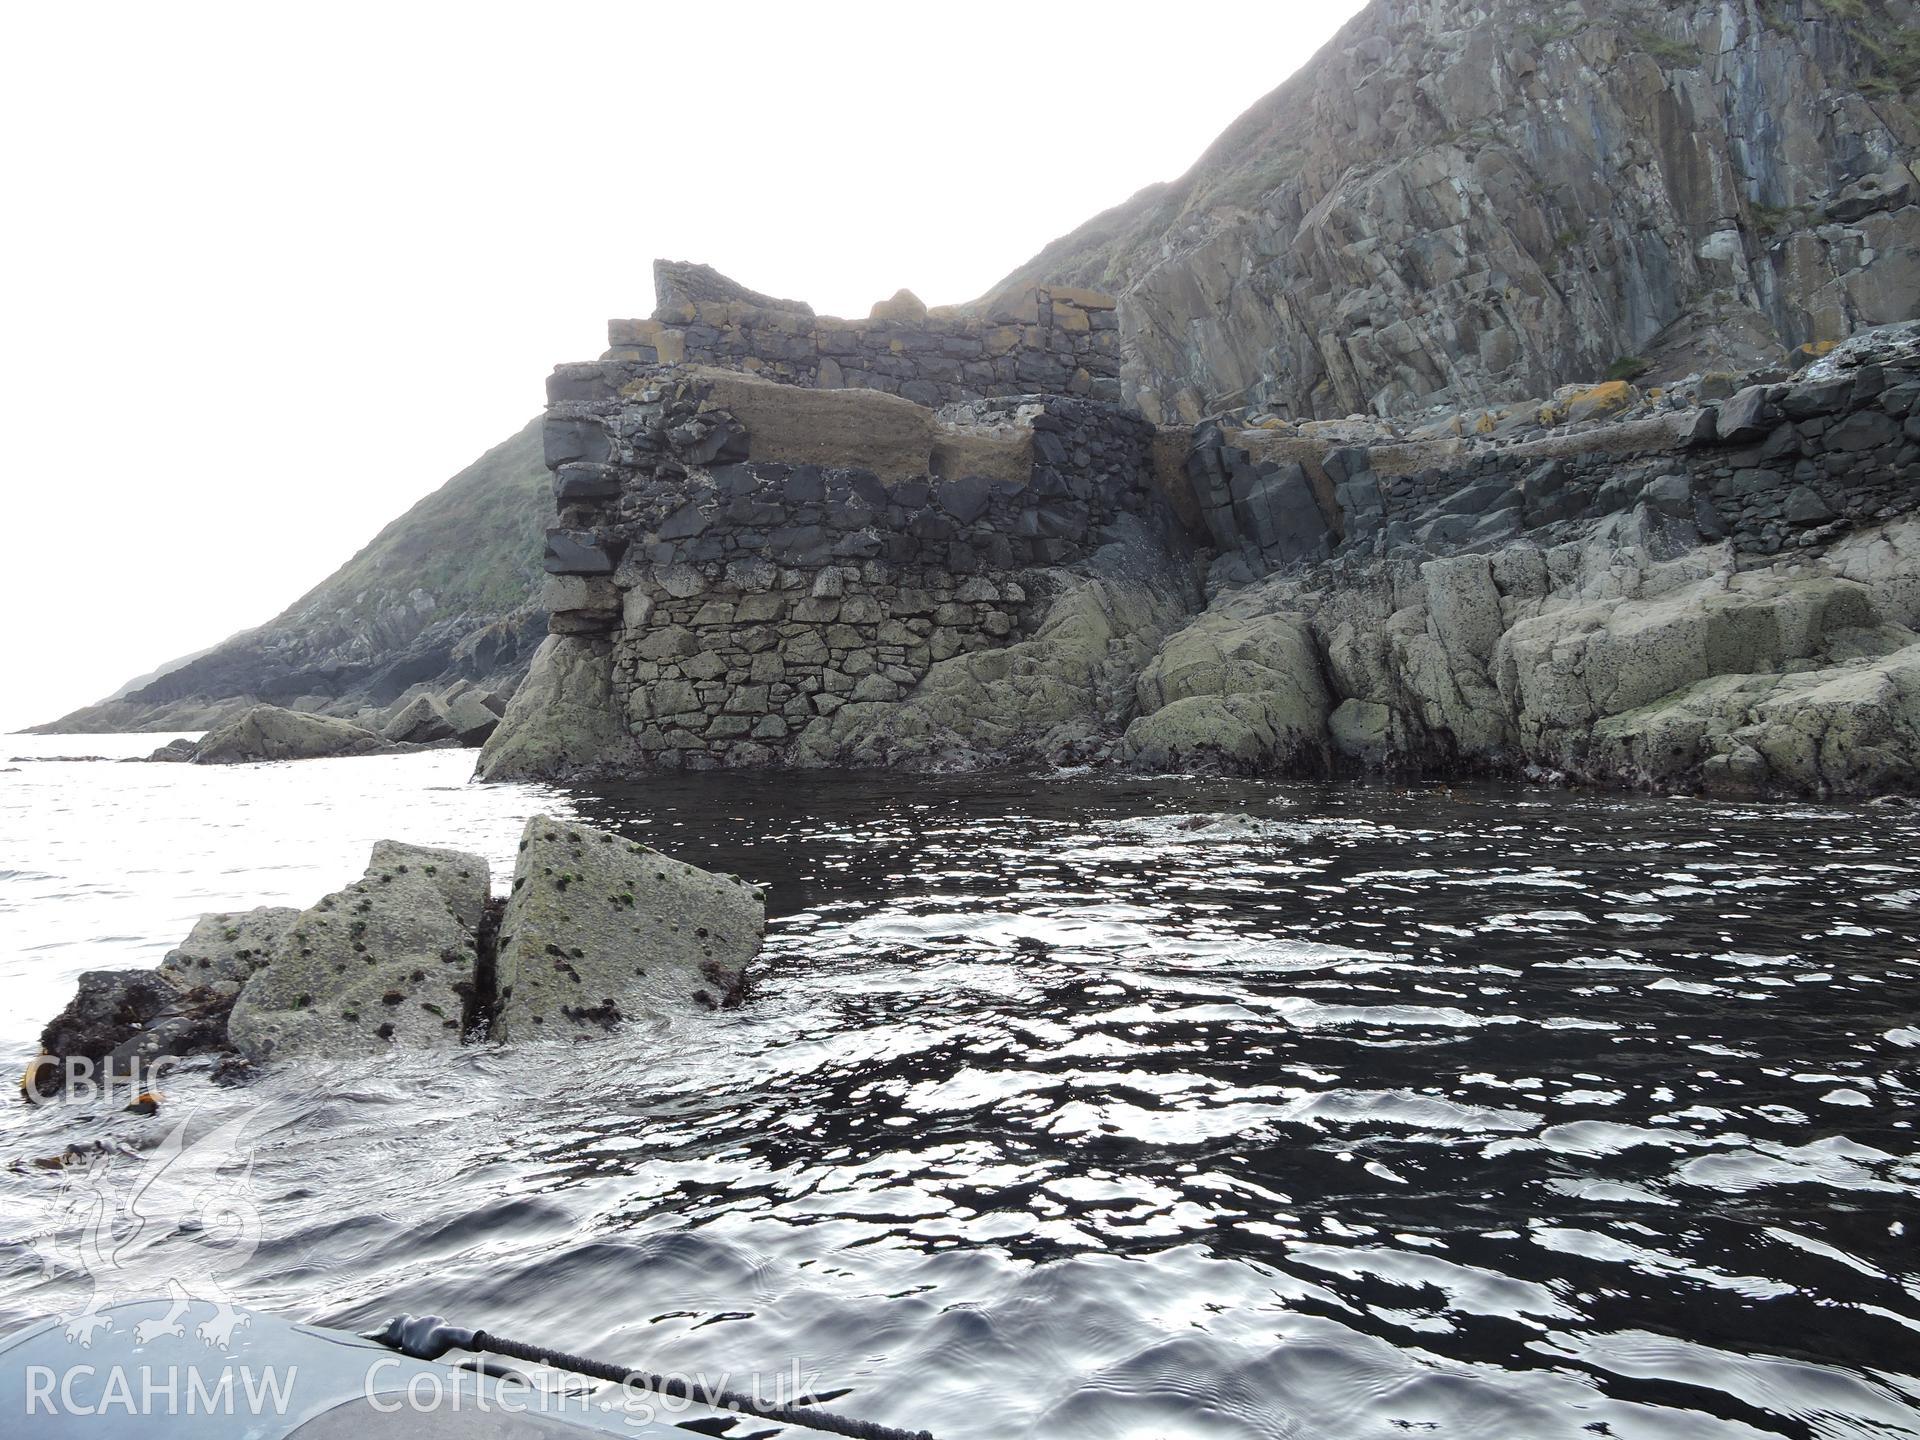 Detailed view of the remains of the quay's stone wall, as seen from sea level. Part of a digital photographic survey of Porth y Pistyll, Aberdaron, produced in 2020 by Michael Statham.